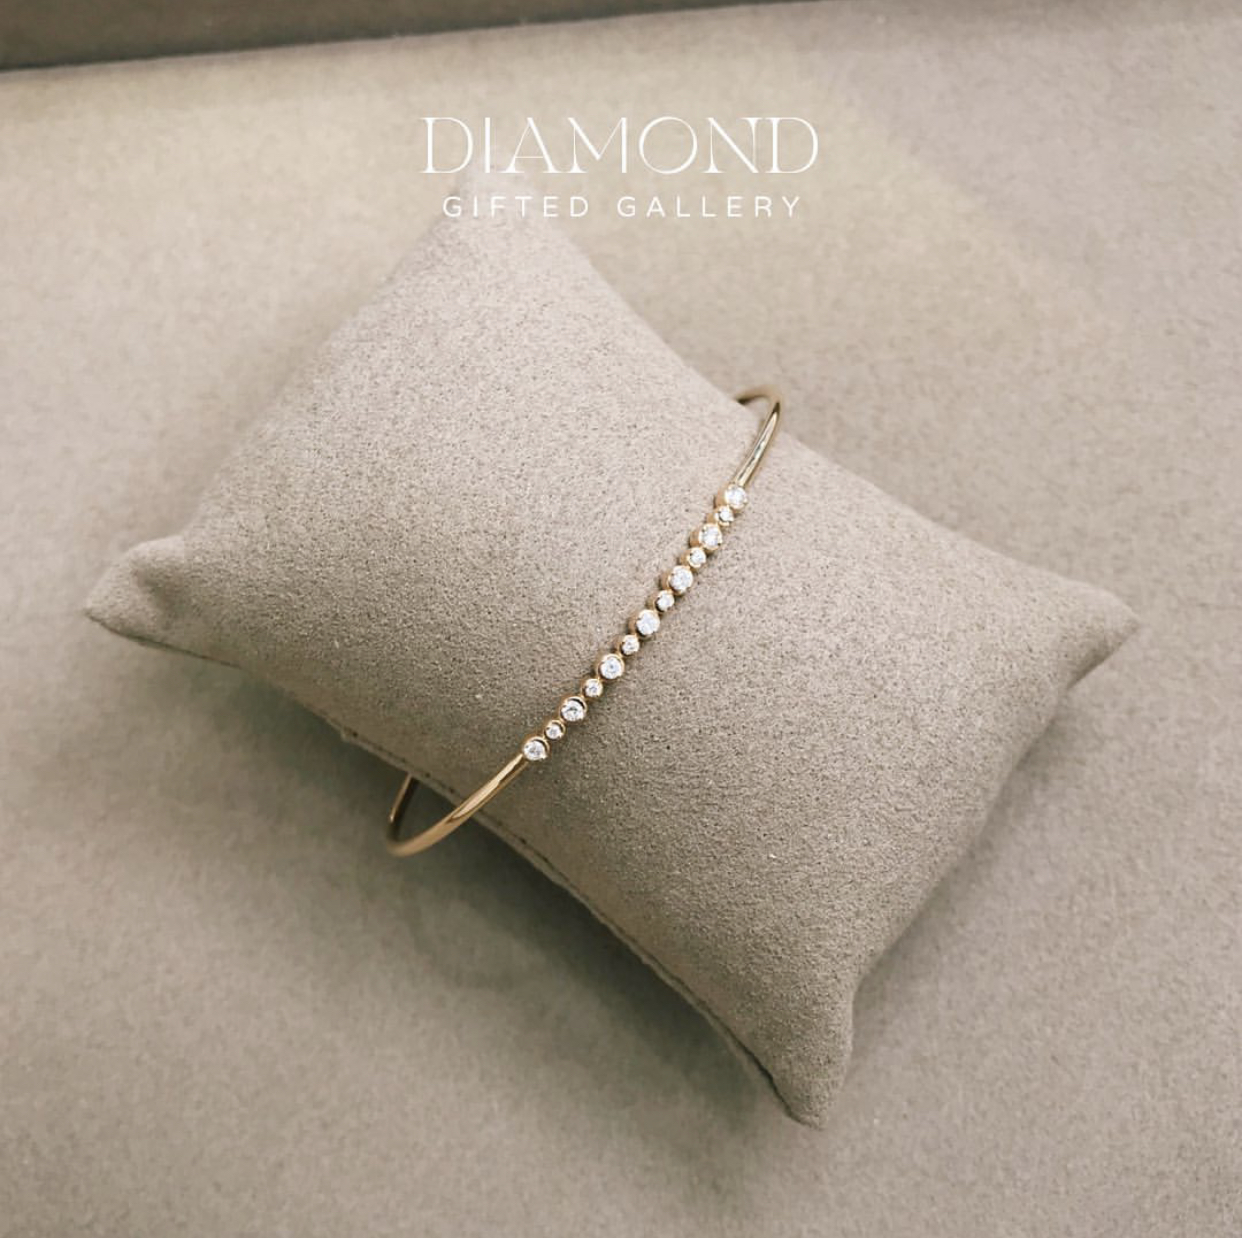 0.20ct Diamond Bracelet by Gifted Gallery